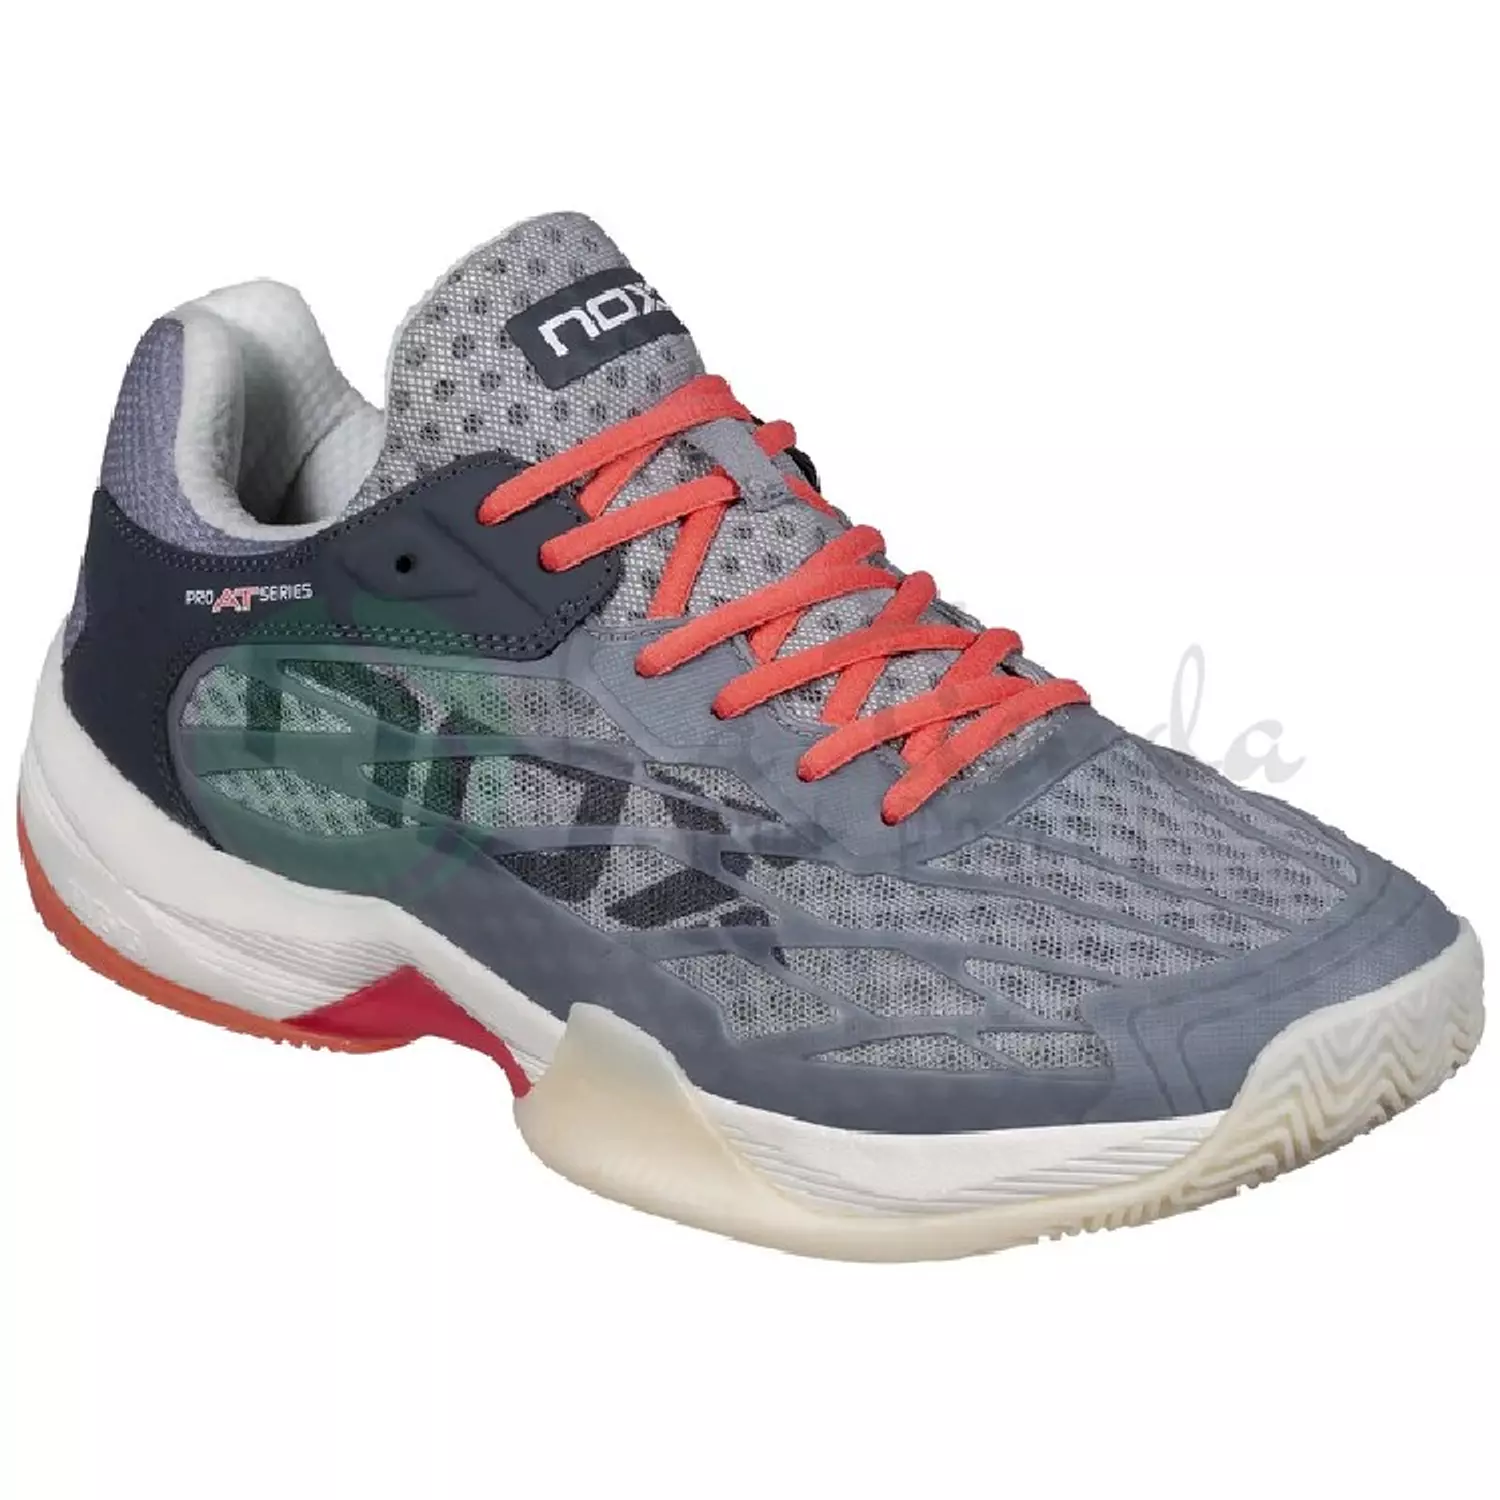 AT10 LUX Padel Shoes Cool Grey/Georgia Peach hover image